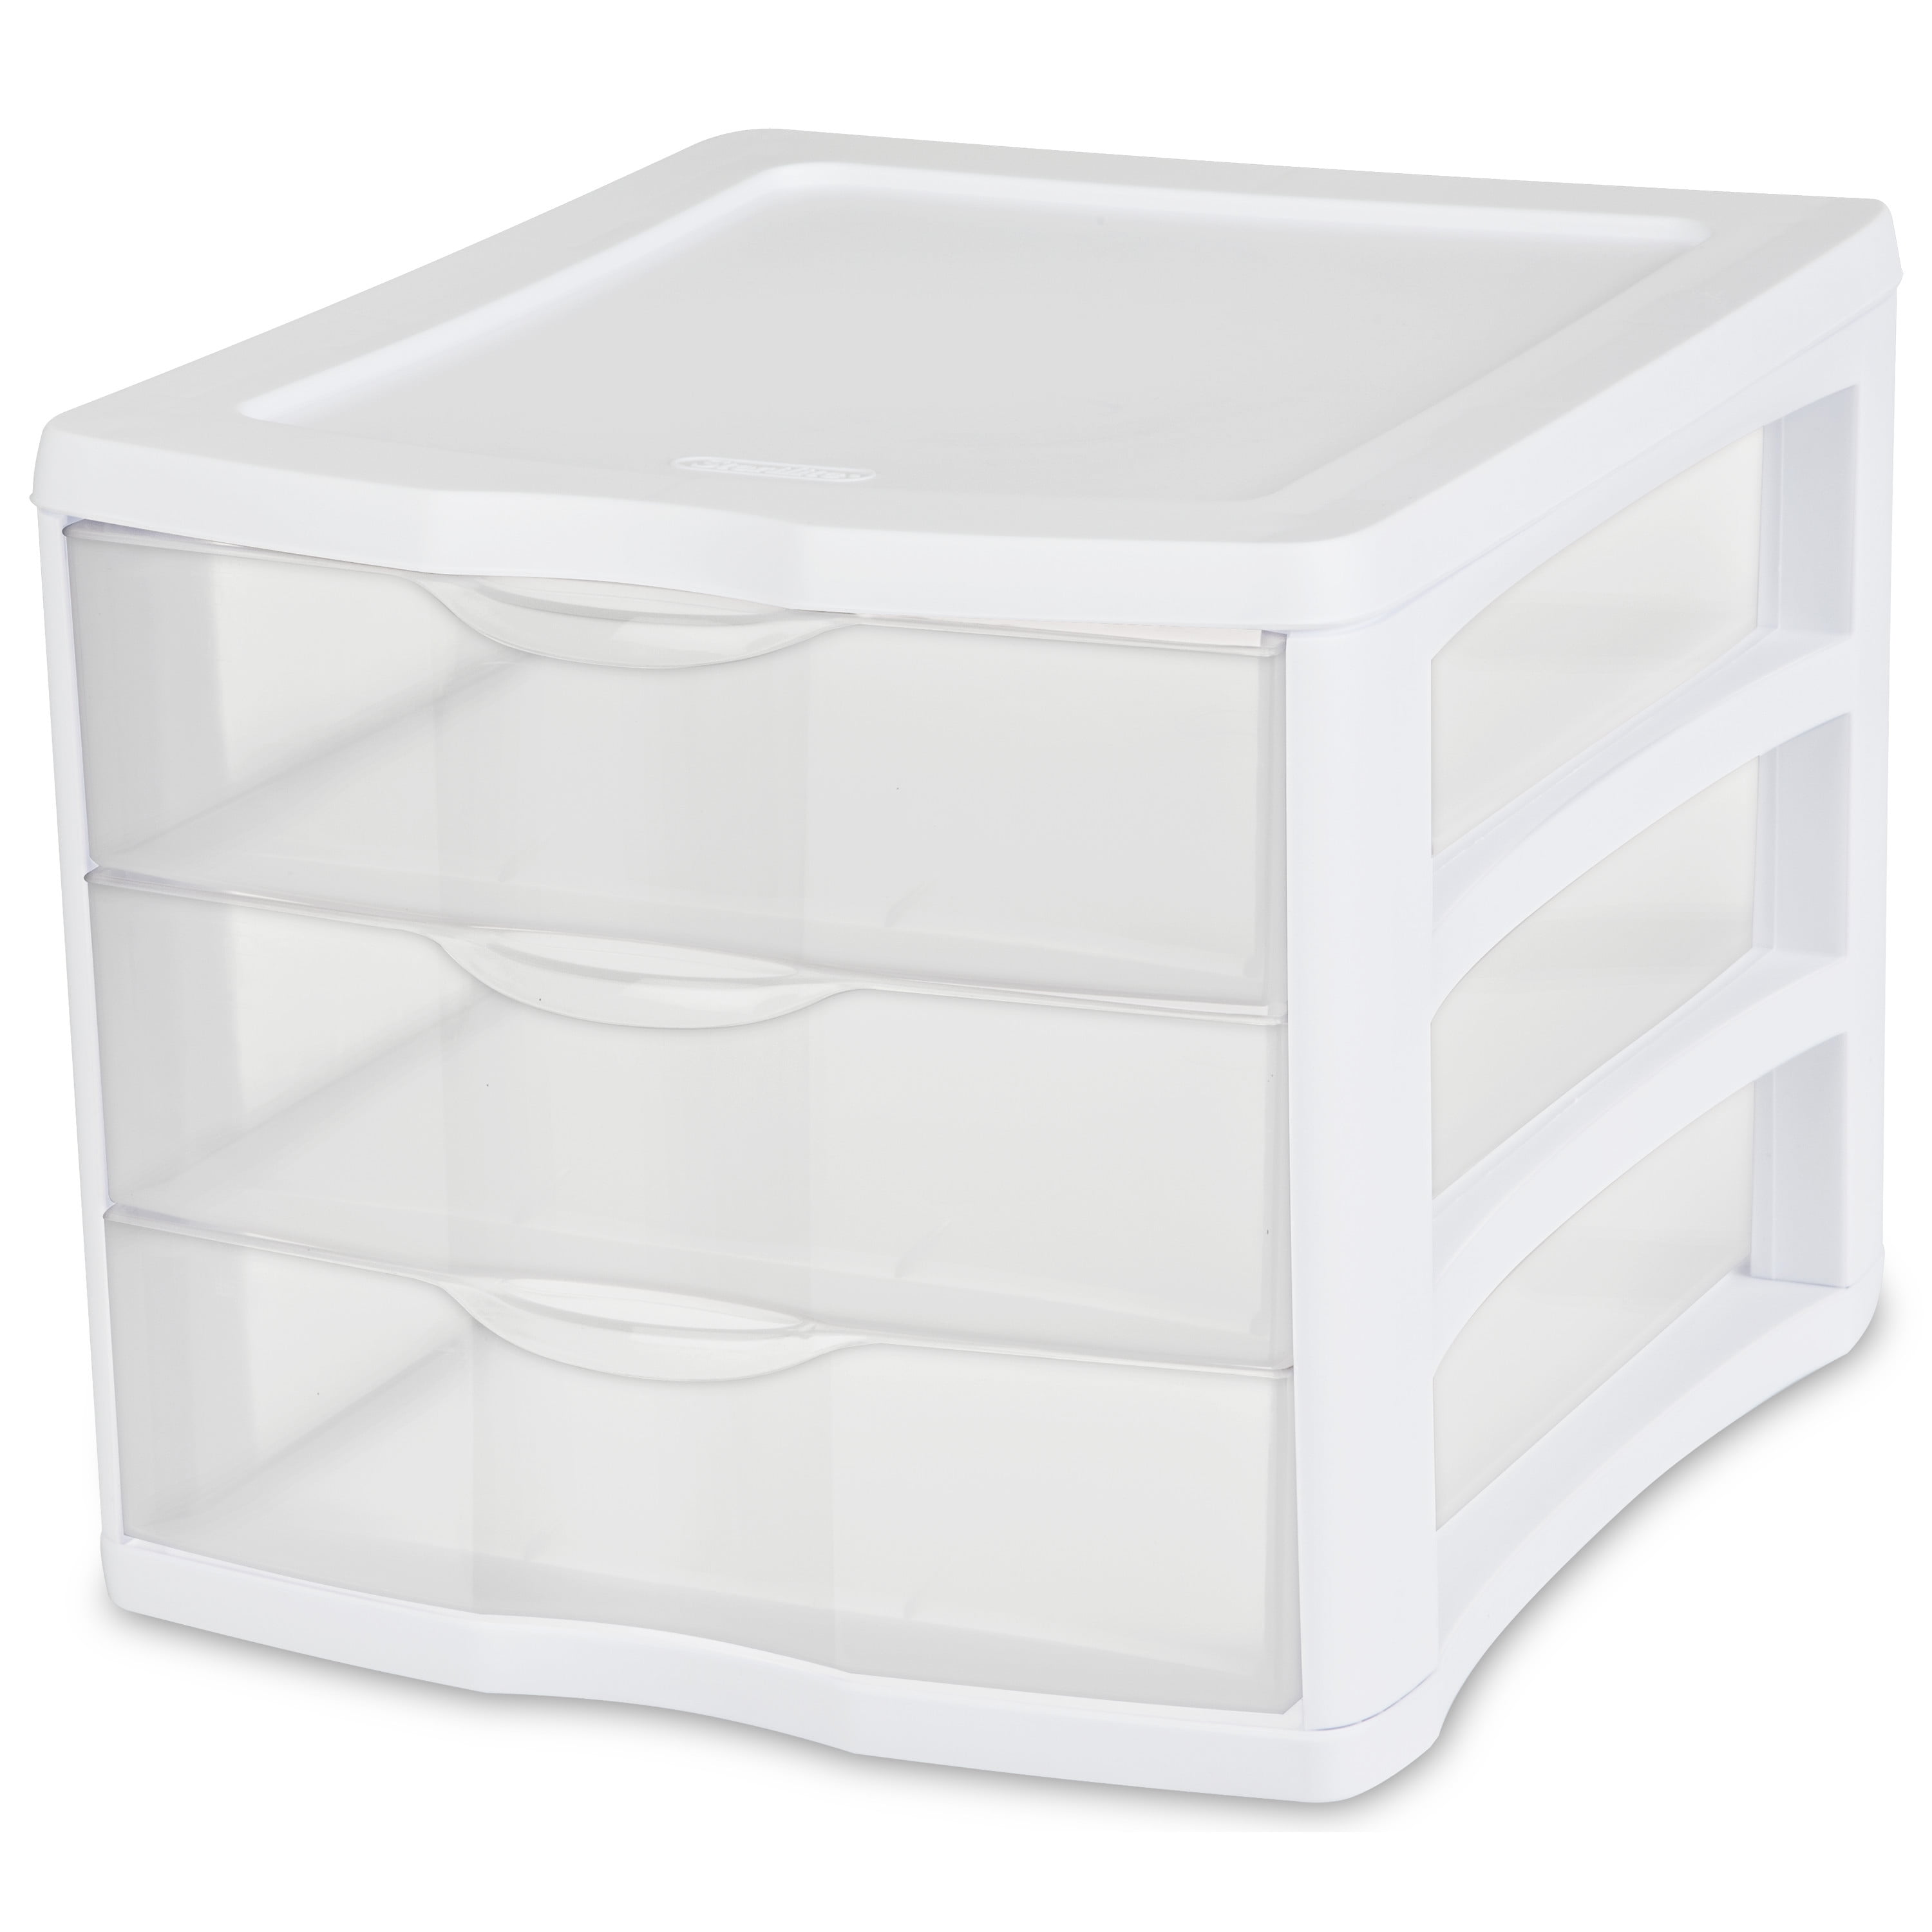 Sterilite Corporation 3-Pack 3-Drawers White Stackable Plastic